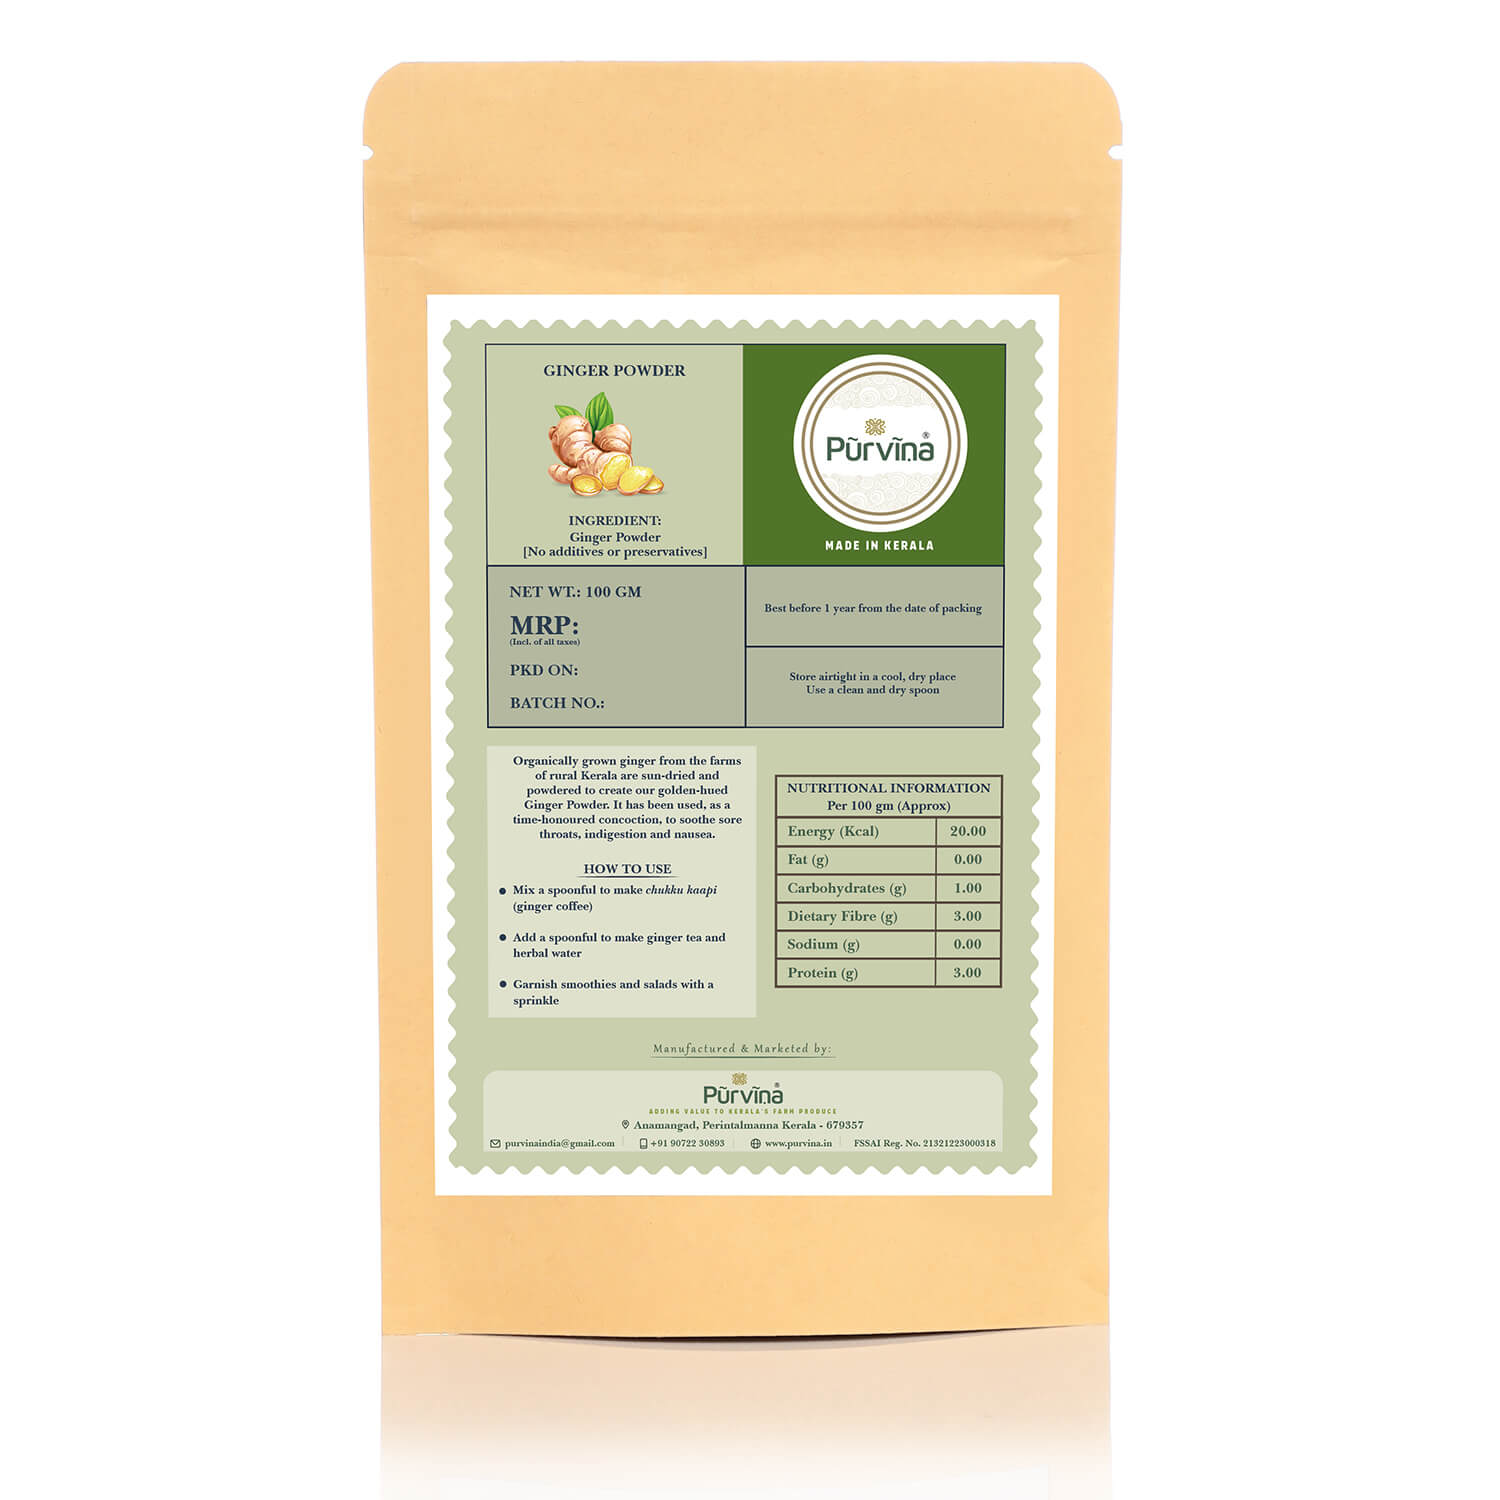 Pūrvīṇa 100% Pure Ginger Powder from Organically Grown Ginger